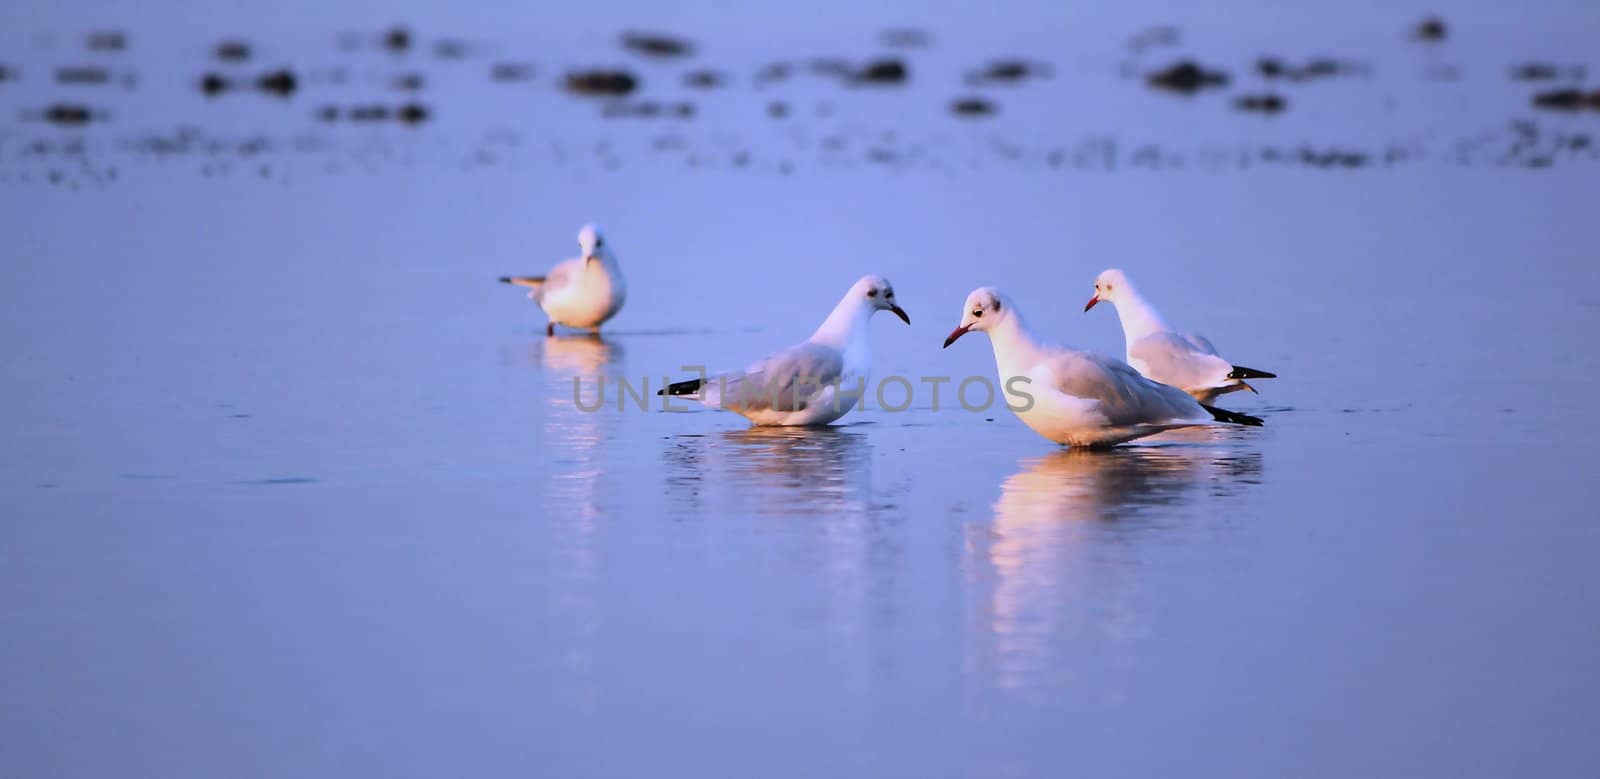 Seagulls on the water by Elenaphotos21